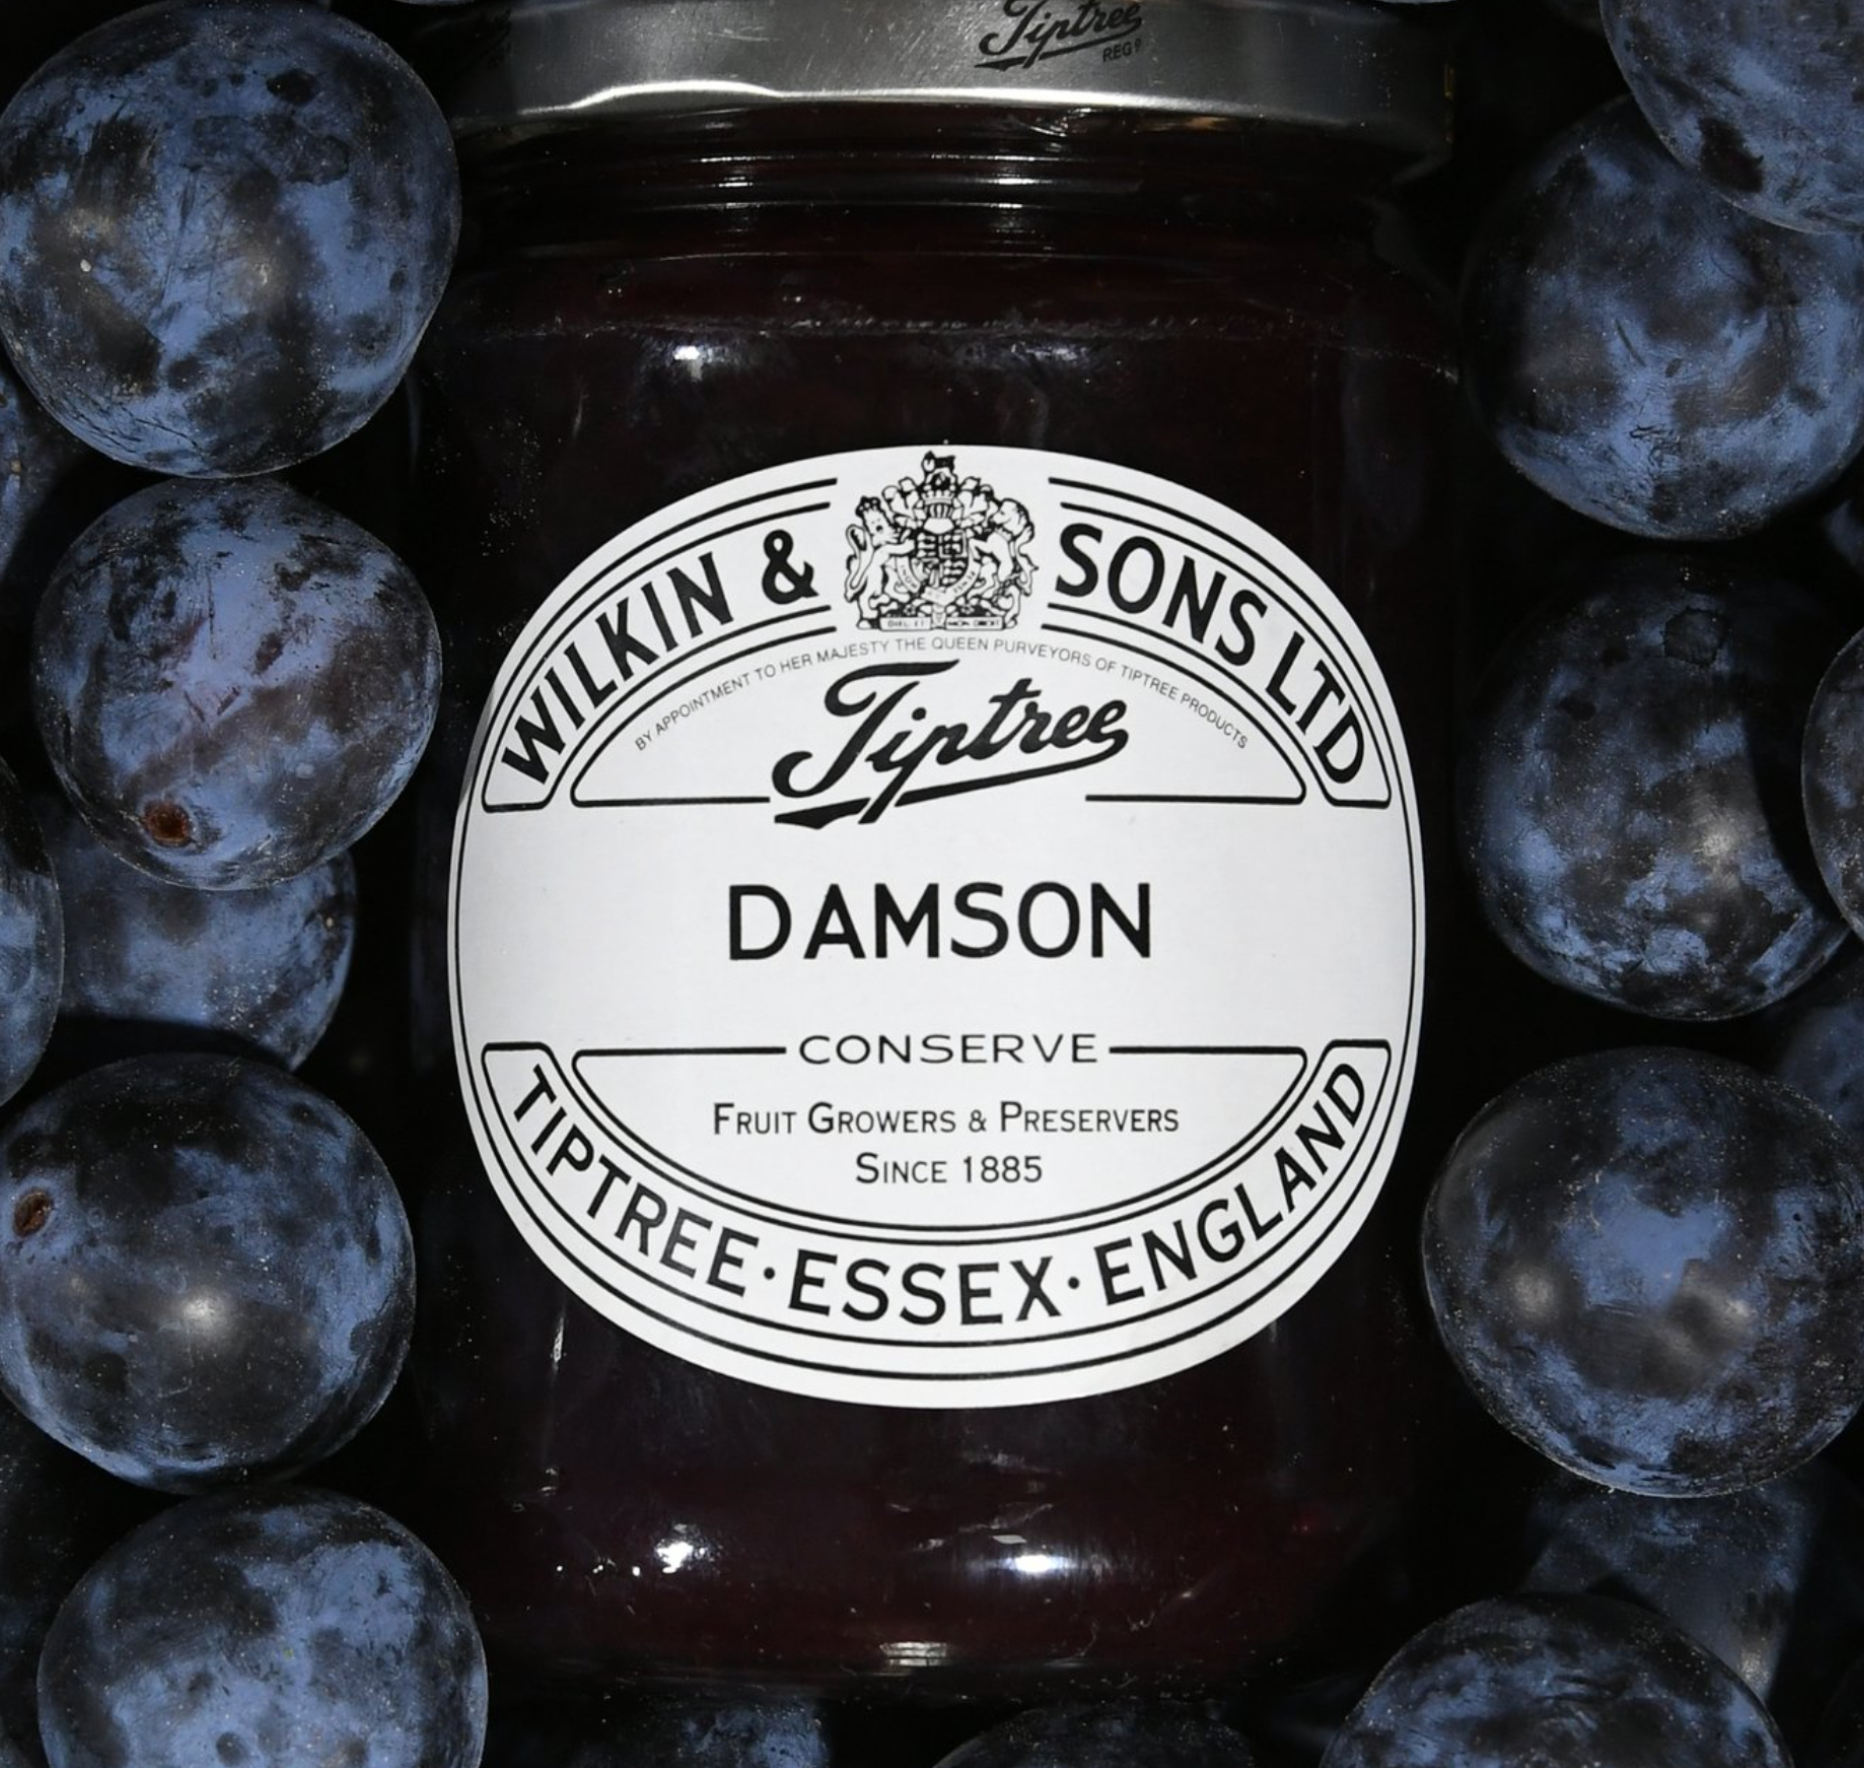 Tiptree jam production line with efficient labeling